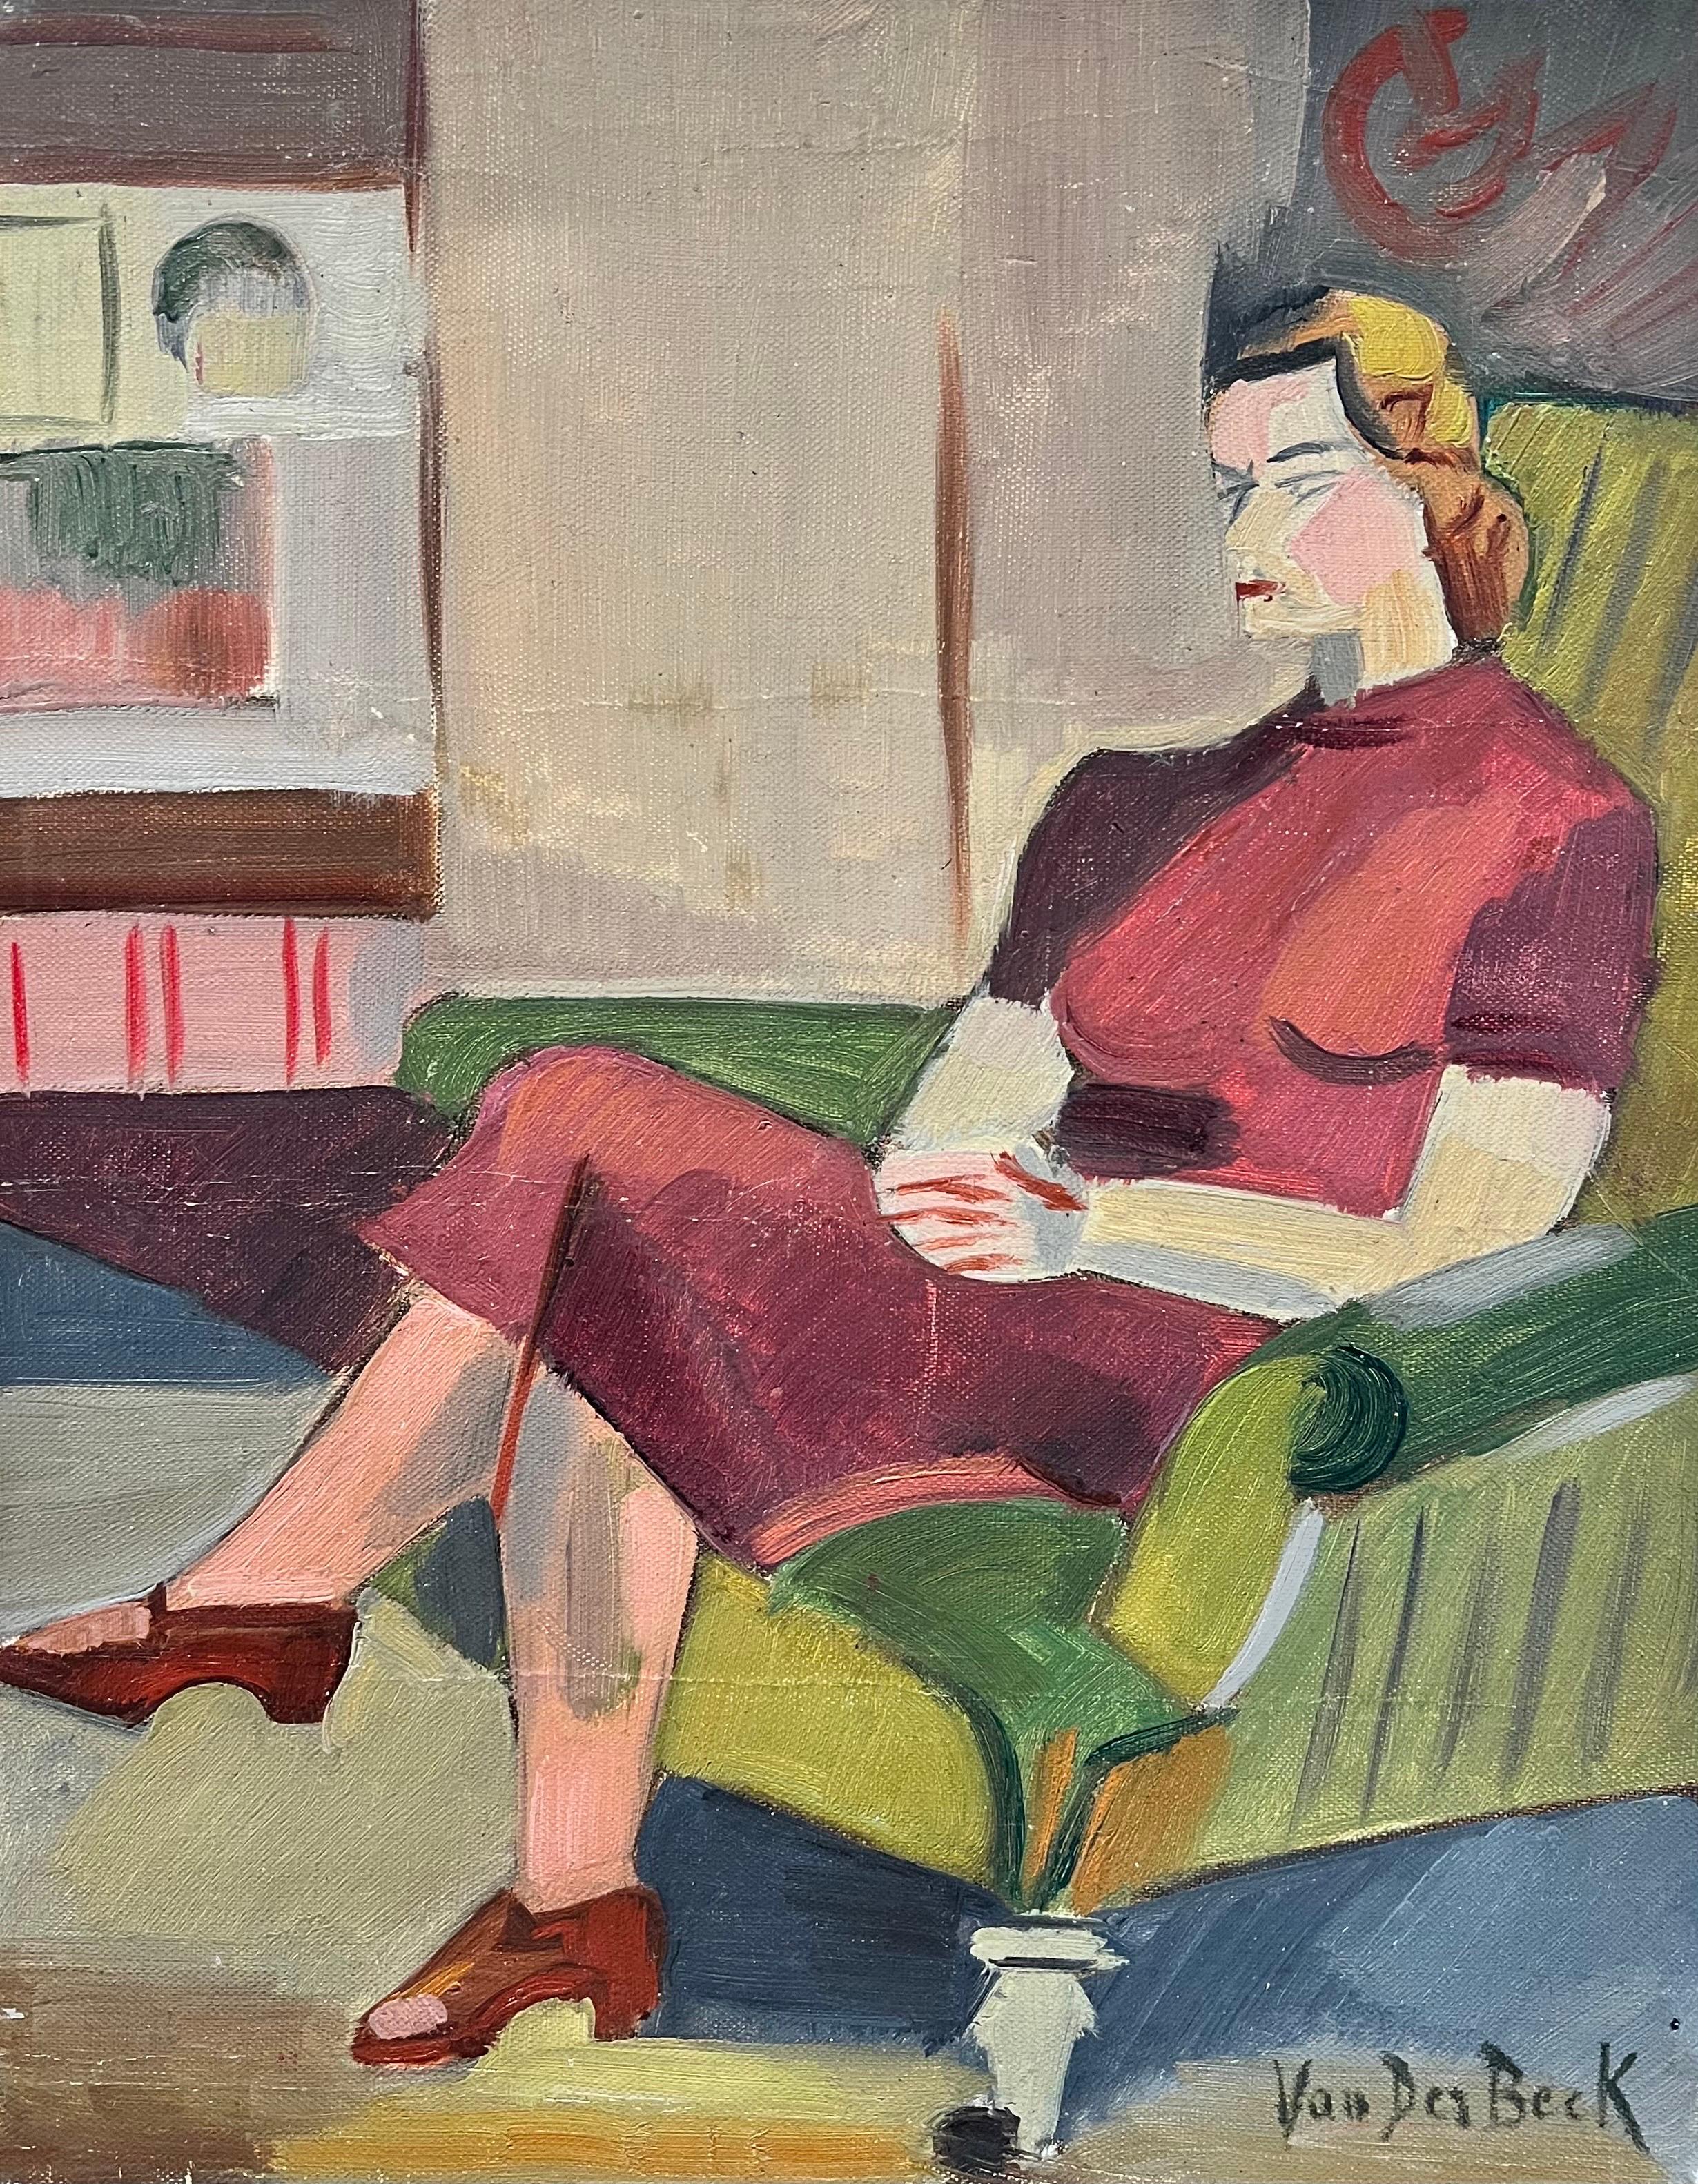 Henri Van Der Beck Interior Painting - 1930's French Cubist Signed Oil Lady in Red Seated on Green Chair in Interior